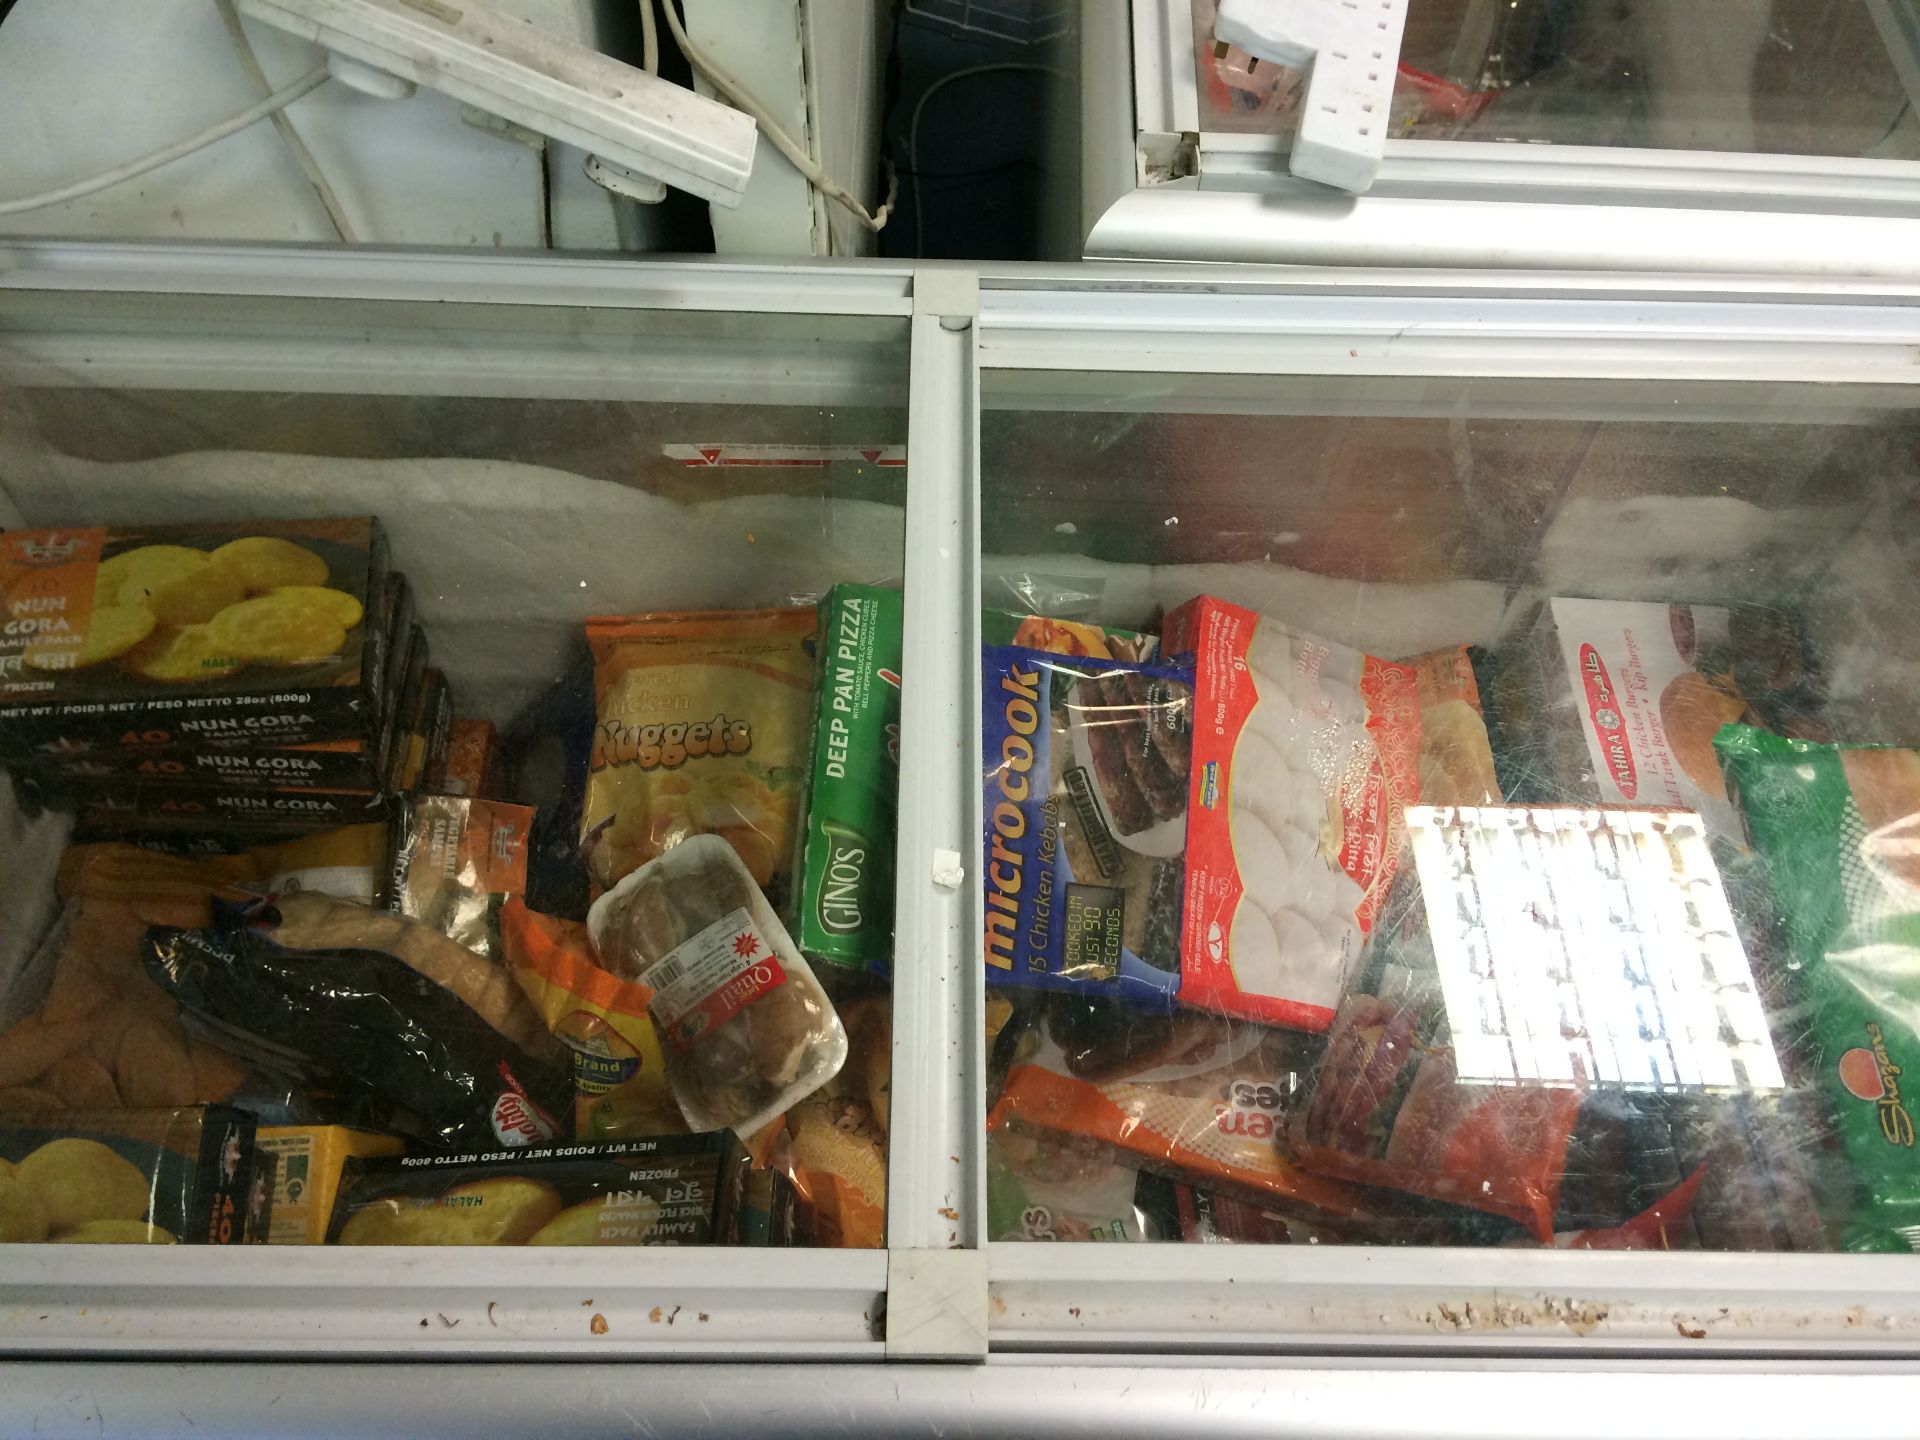 Elcold Shop Freezer With Sliding Top Approx 5 x 2 feet Containing About 50 Packs Of Frozen Food - Image 2 of 2